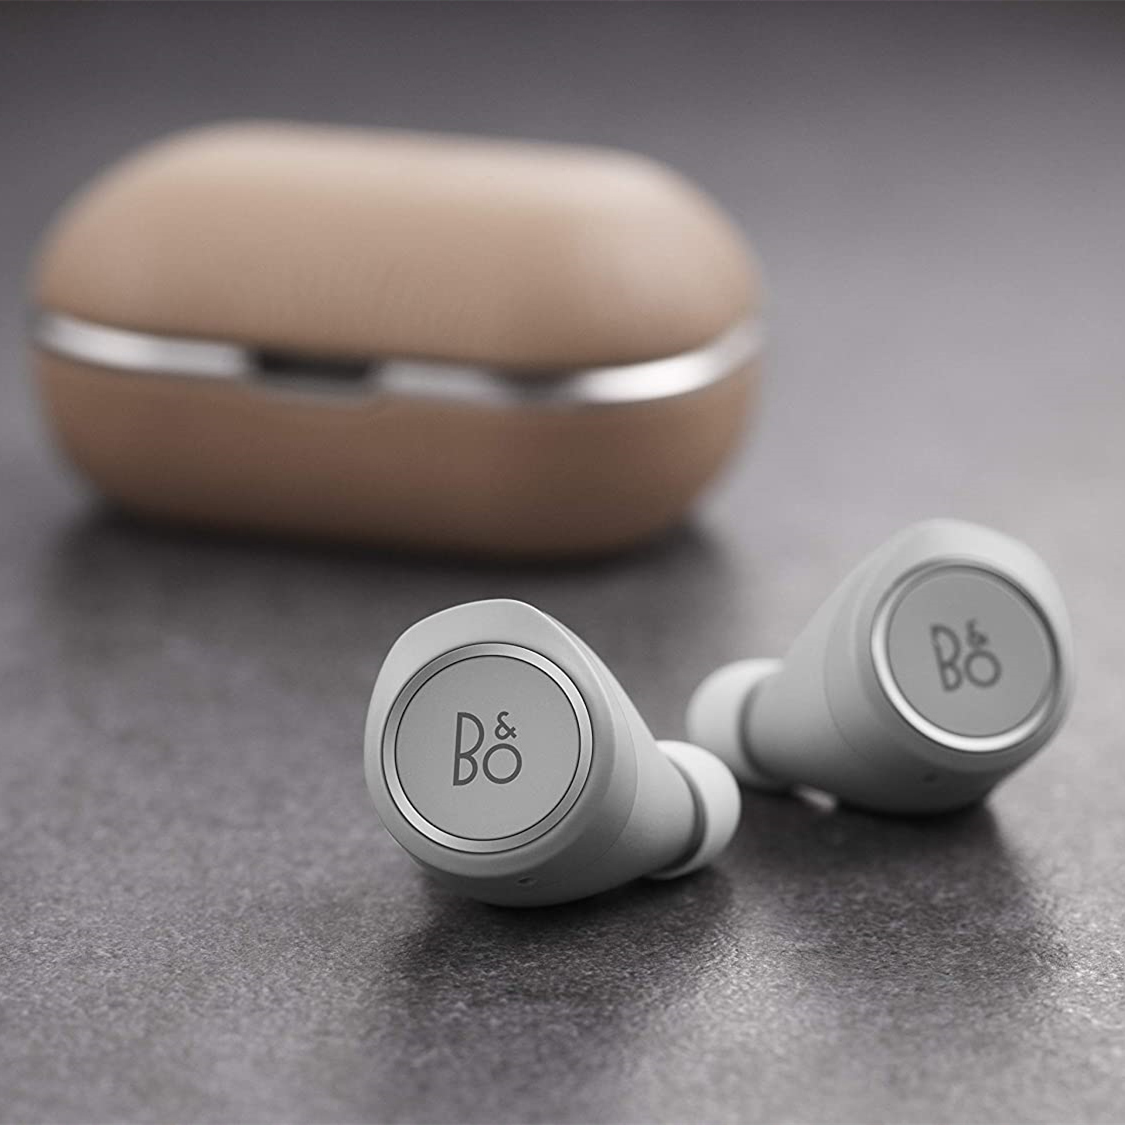 Bang & Olufsen Beoplay E8蓝牙无线耳机